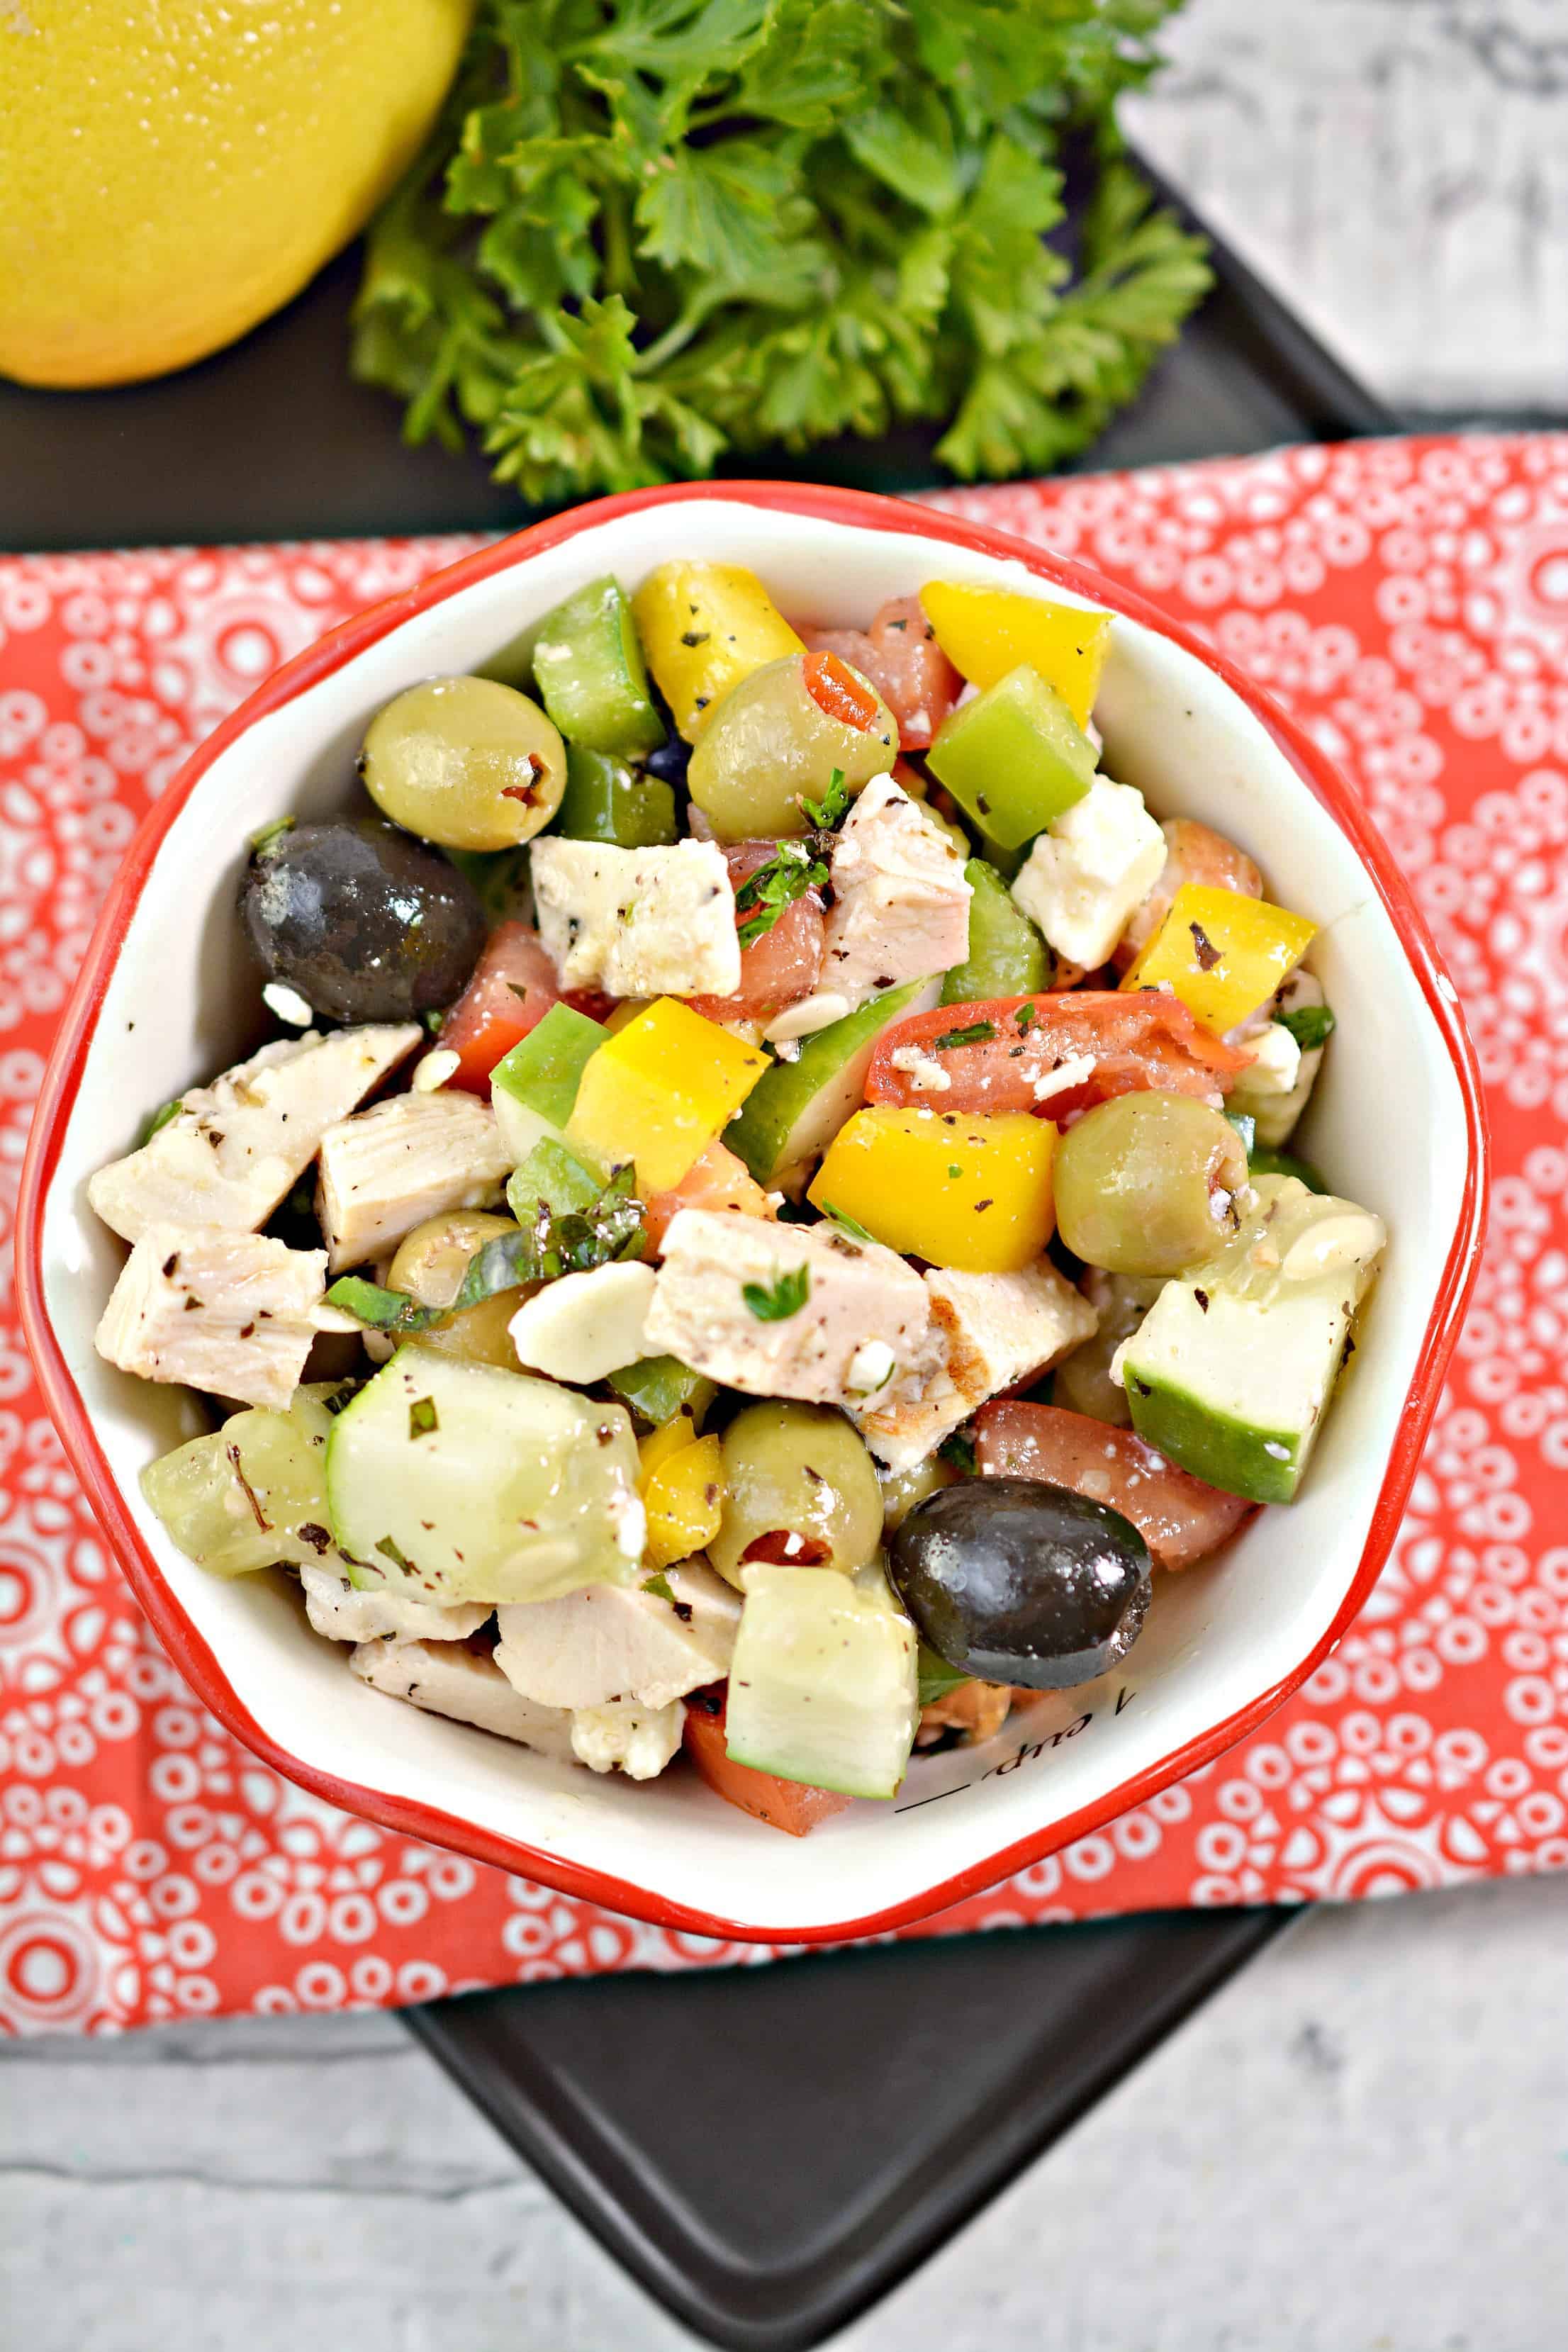 Chopped Greek Salad Recipe with Grilled Chicken